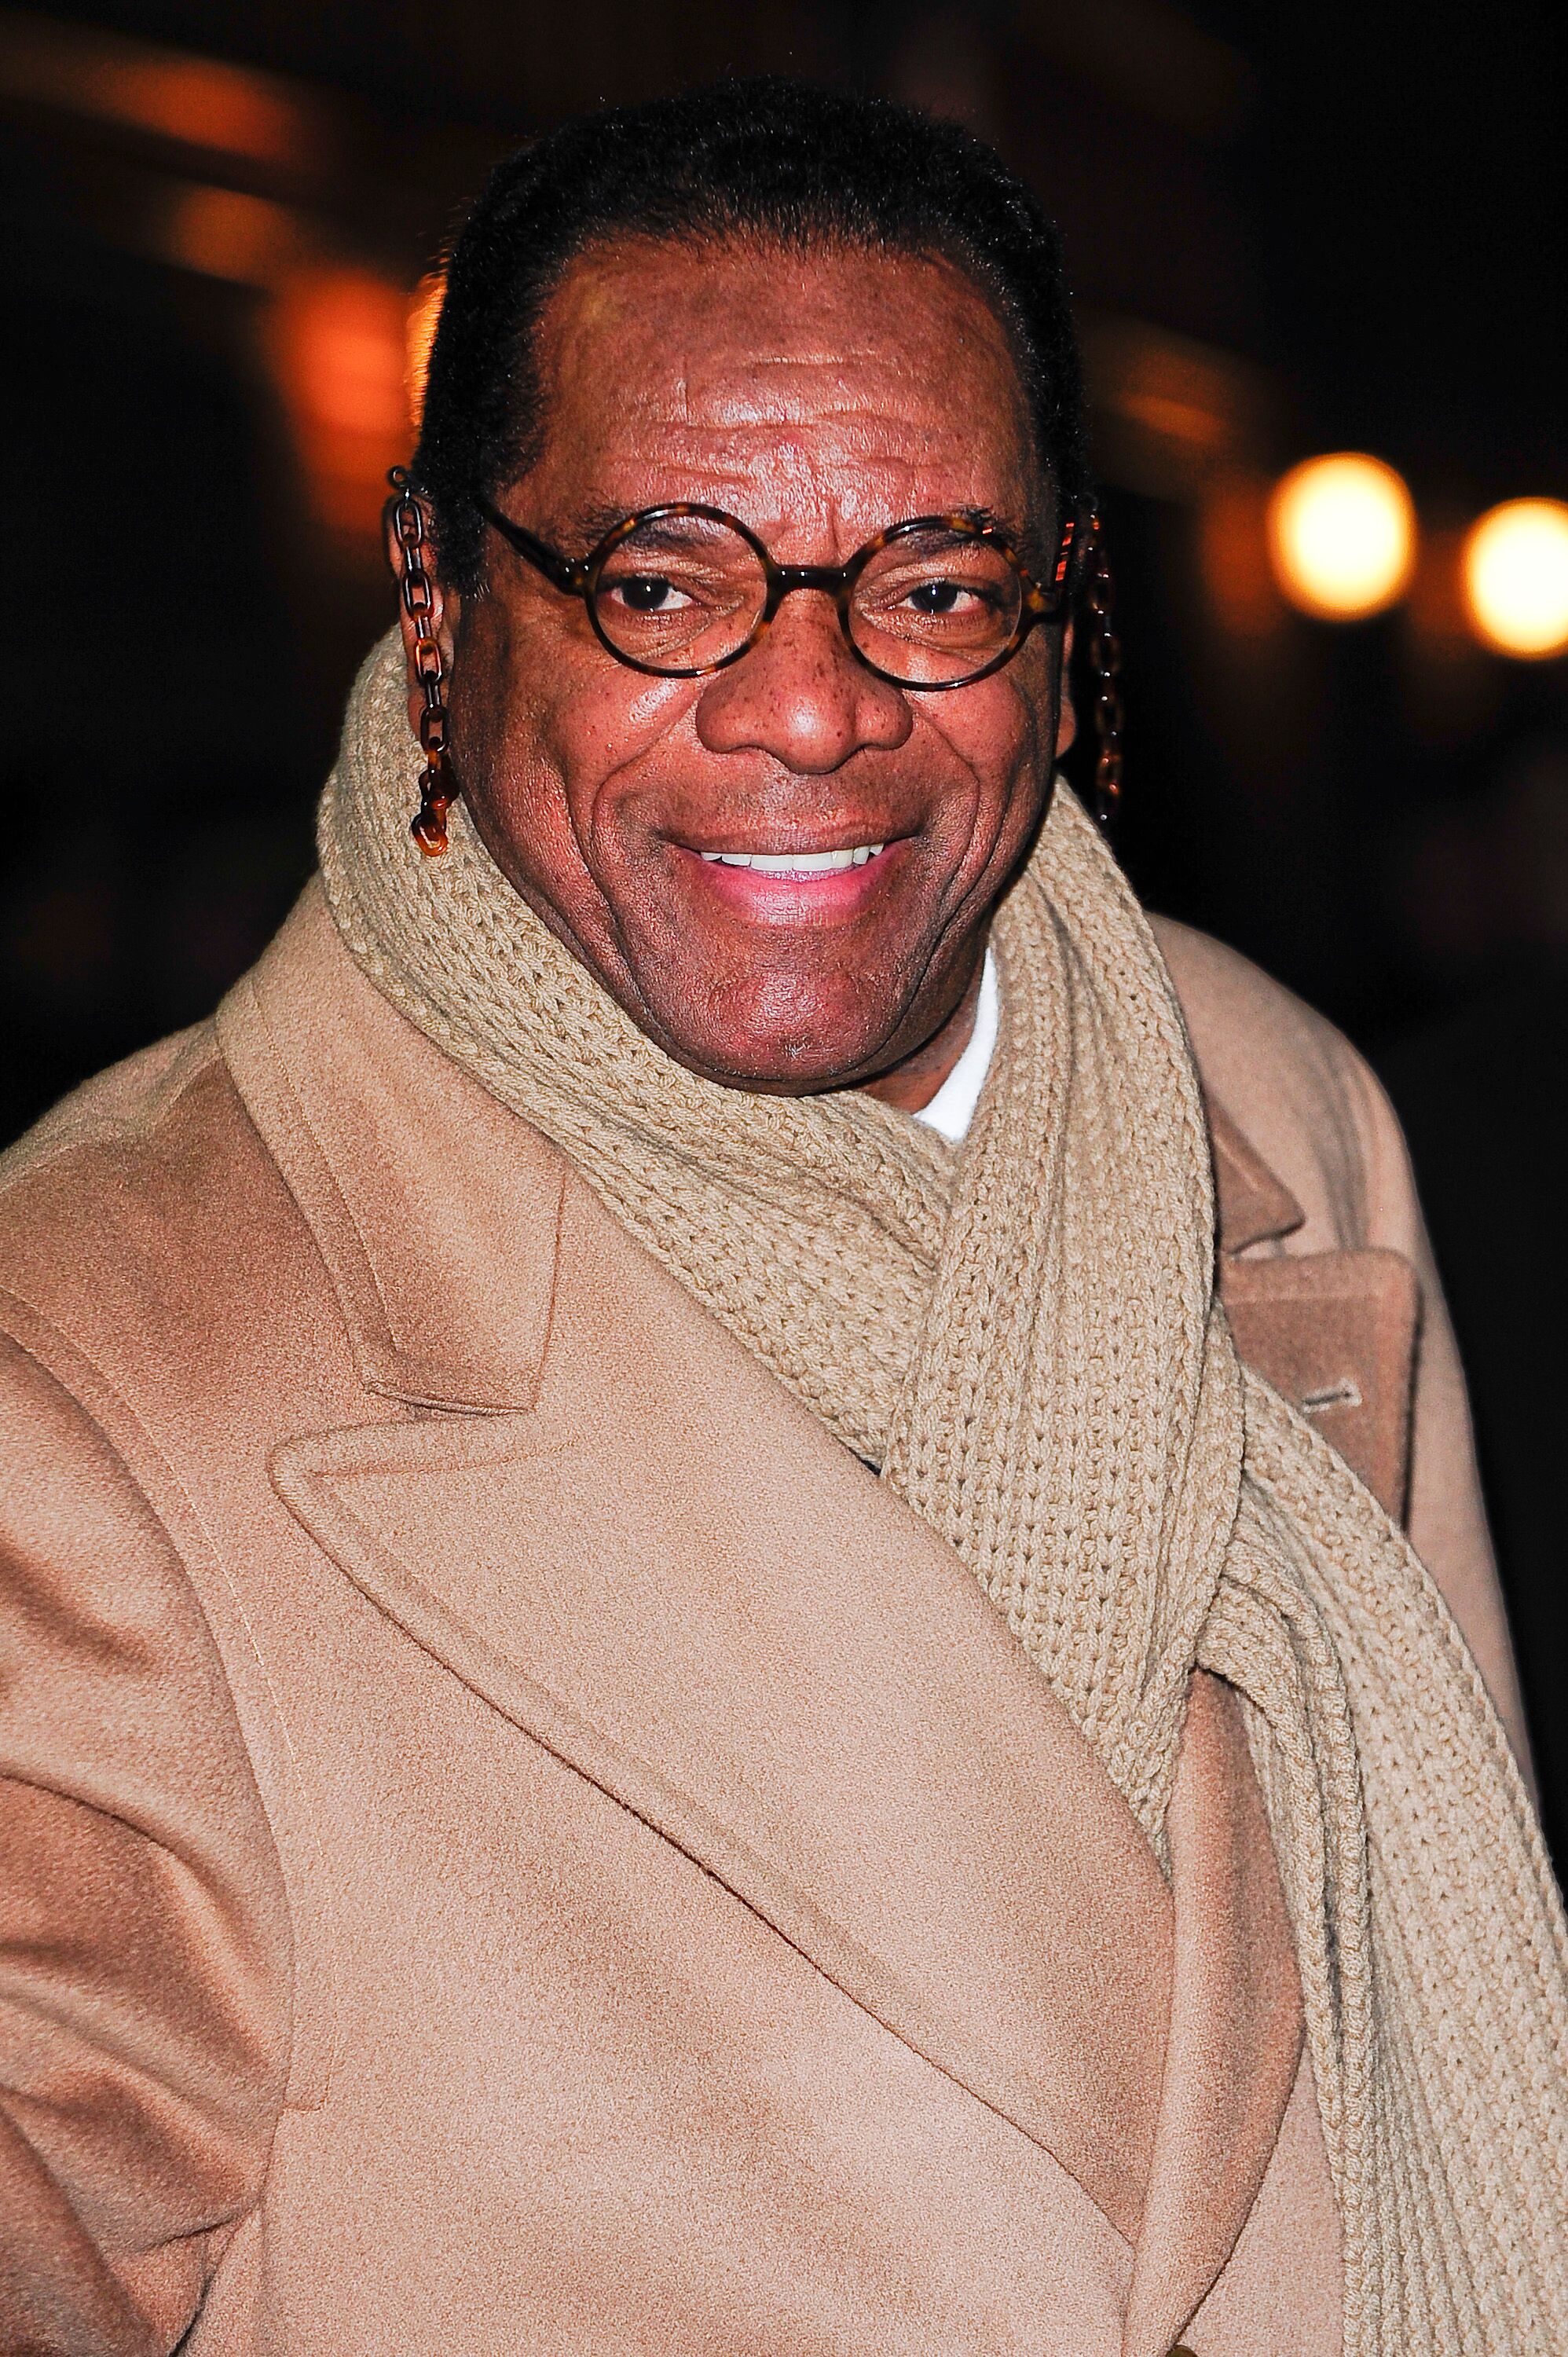 John Witherspoon visiting "The Late Night Show with David Letterman" in 2009. | Photo: Getty Images